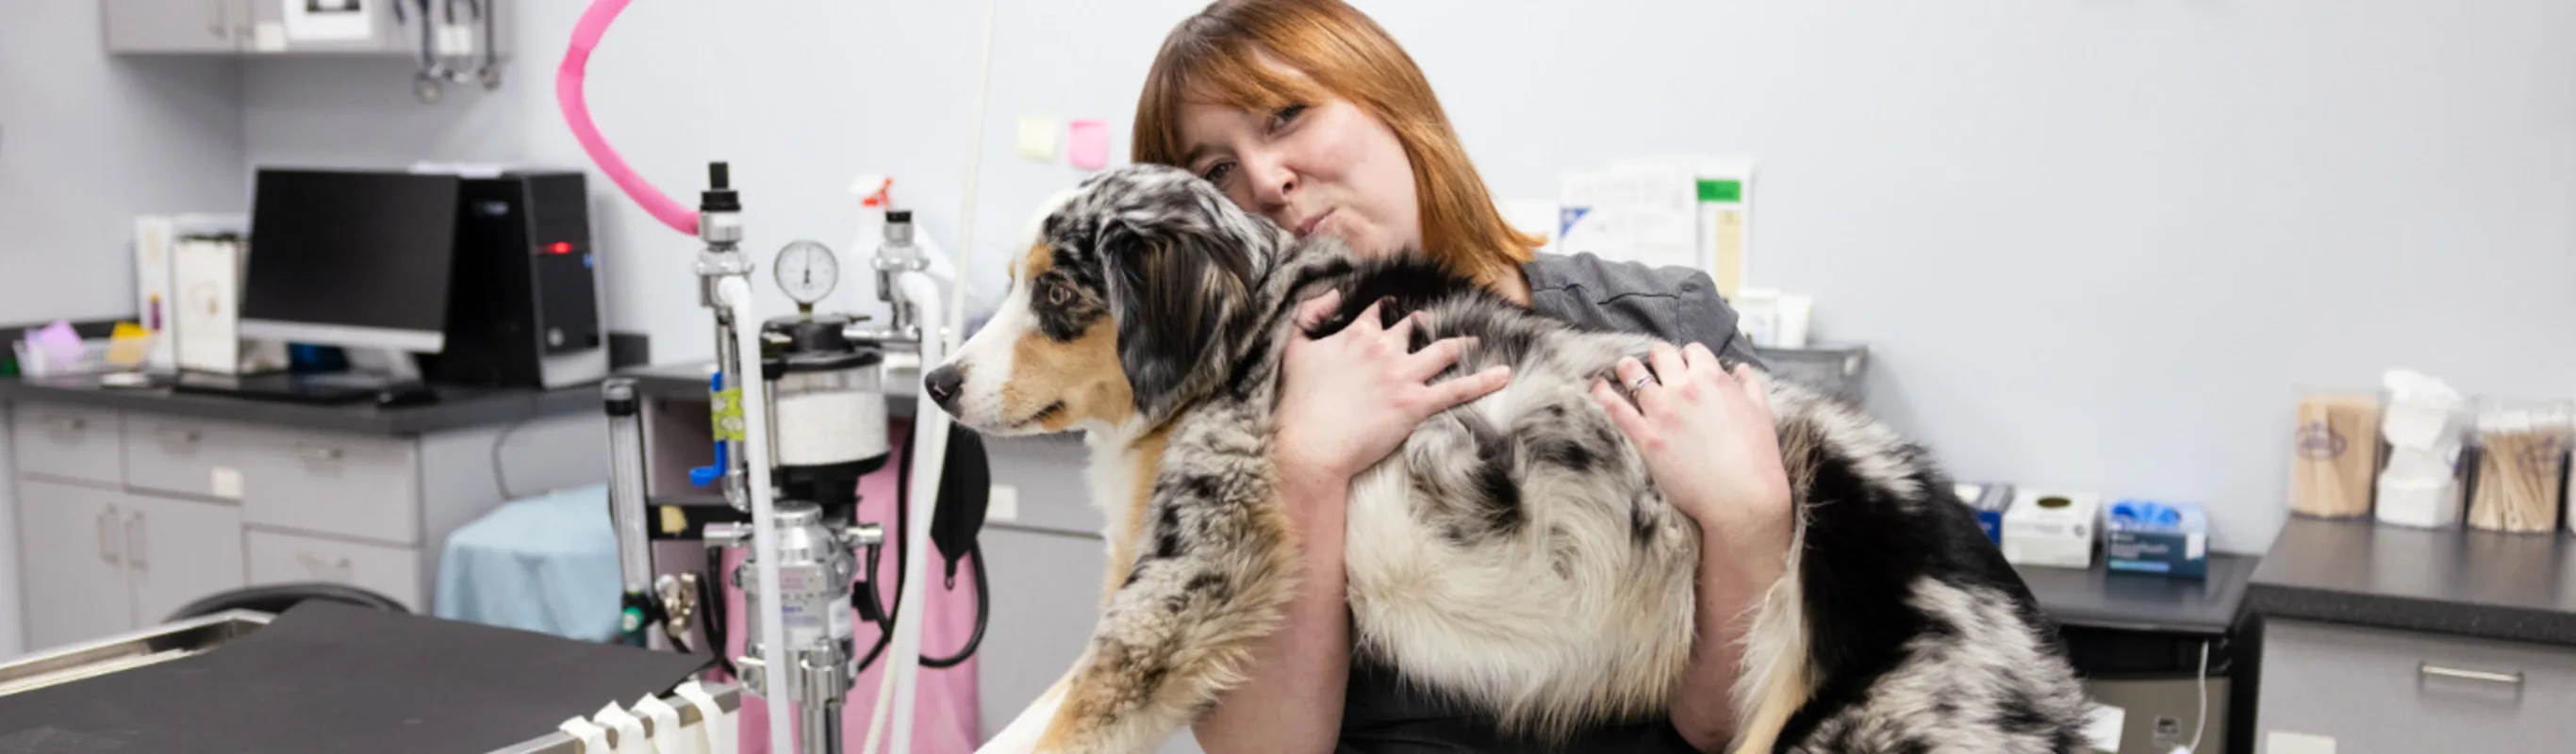 Staff member holding a spotted dog in exam room